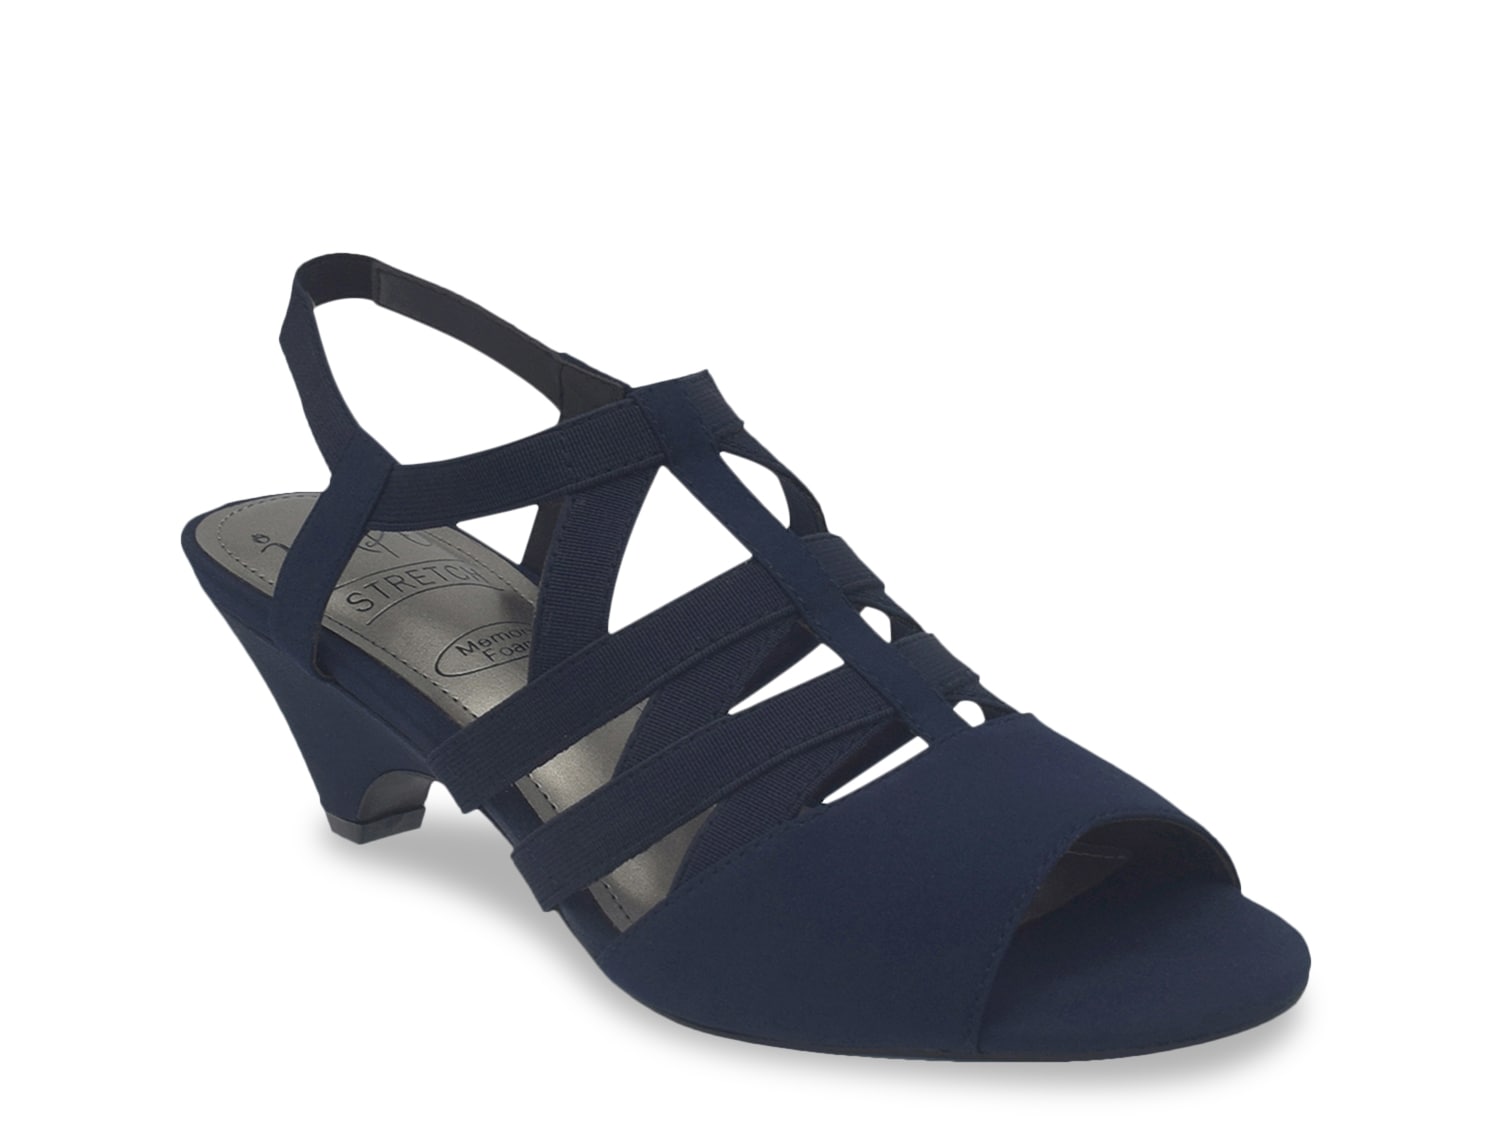 Impo Edalyn Sandal - Free Shipping | DSW